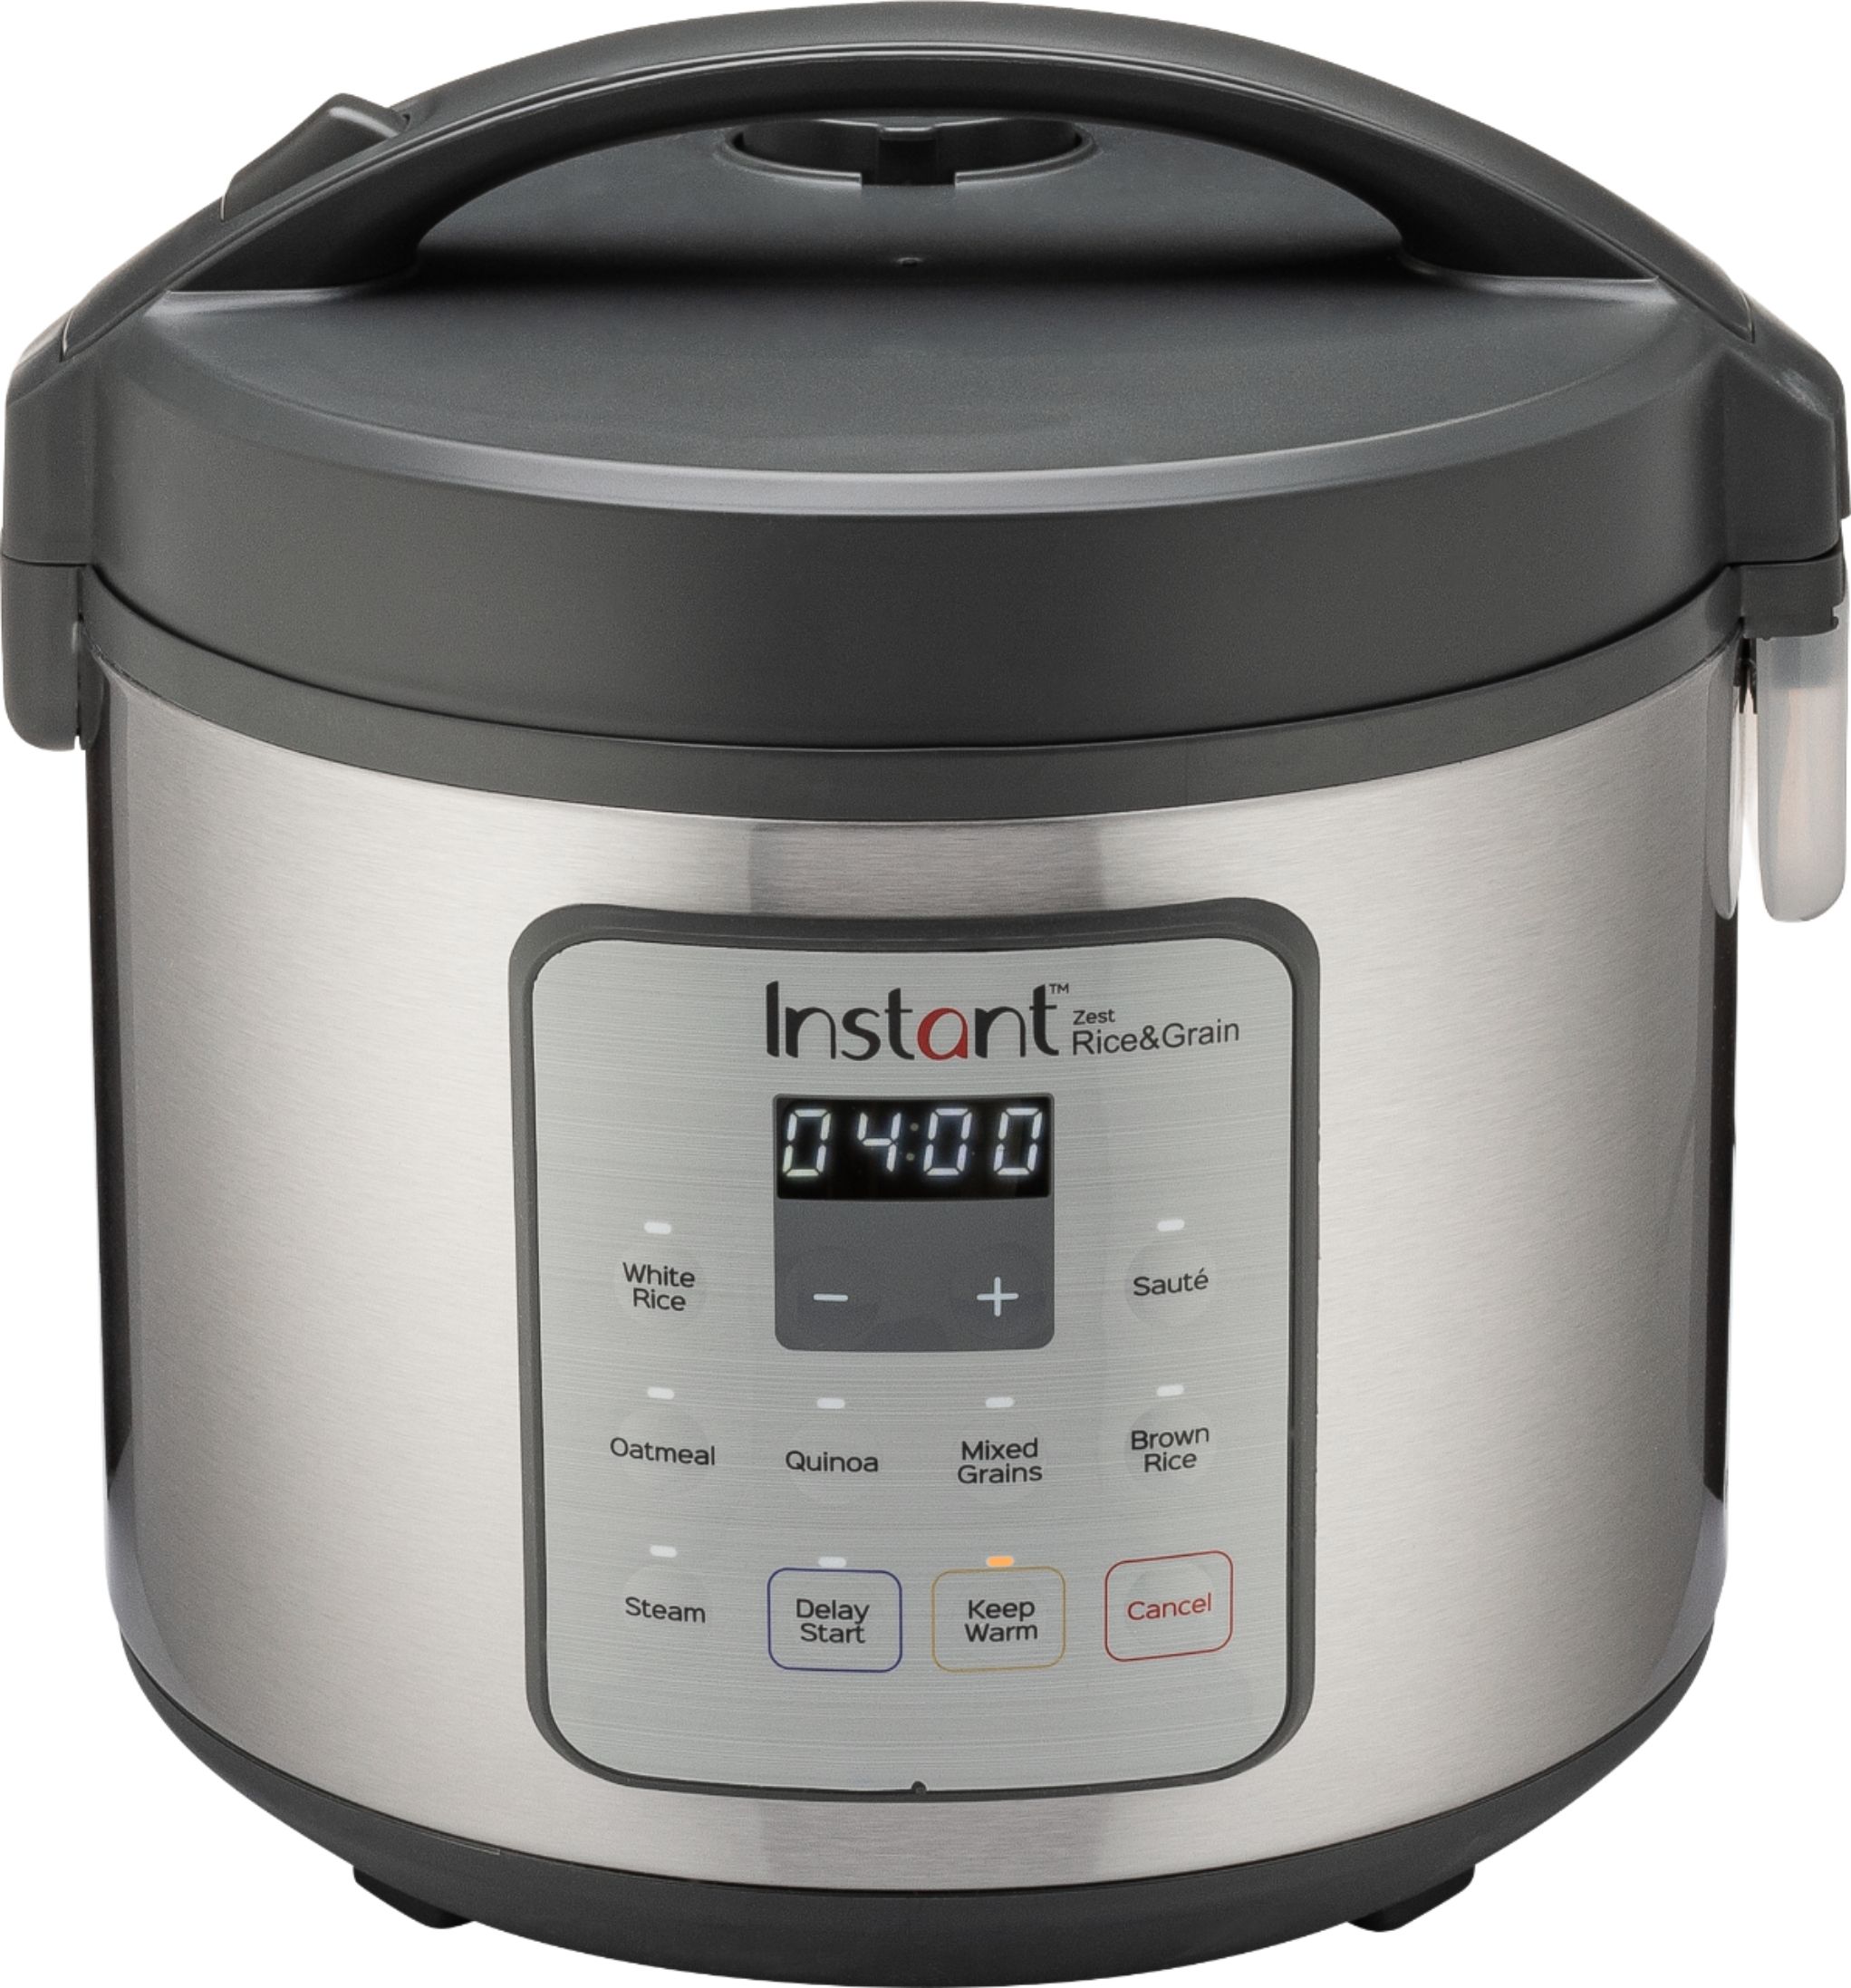 Angle View: Instant - Zest 20 Cup Rice and Grain Cooker - Stainless Steel/Silver